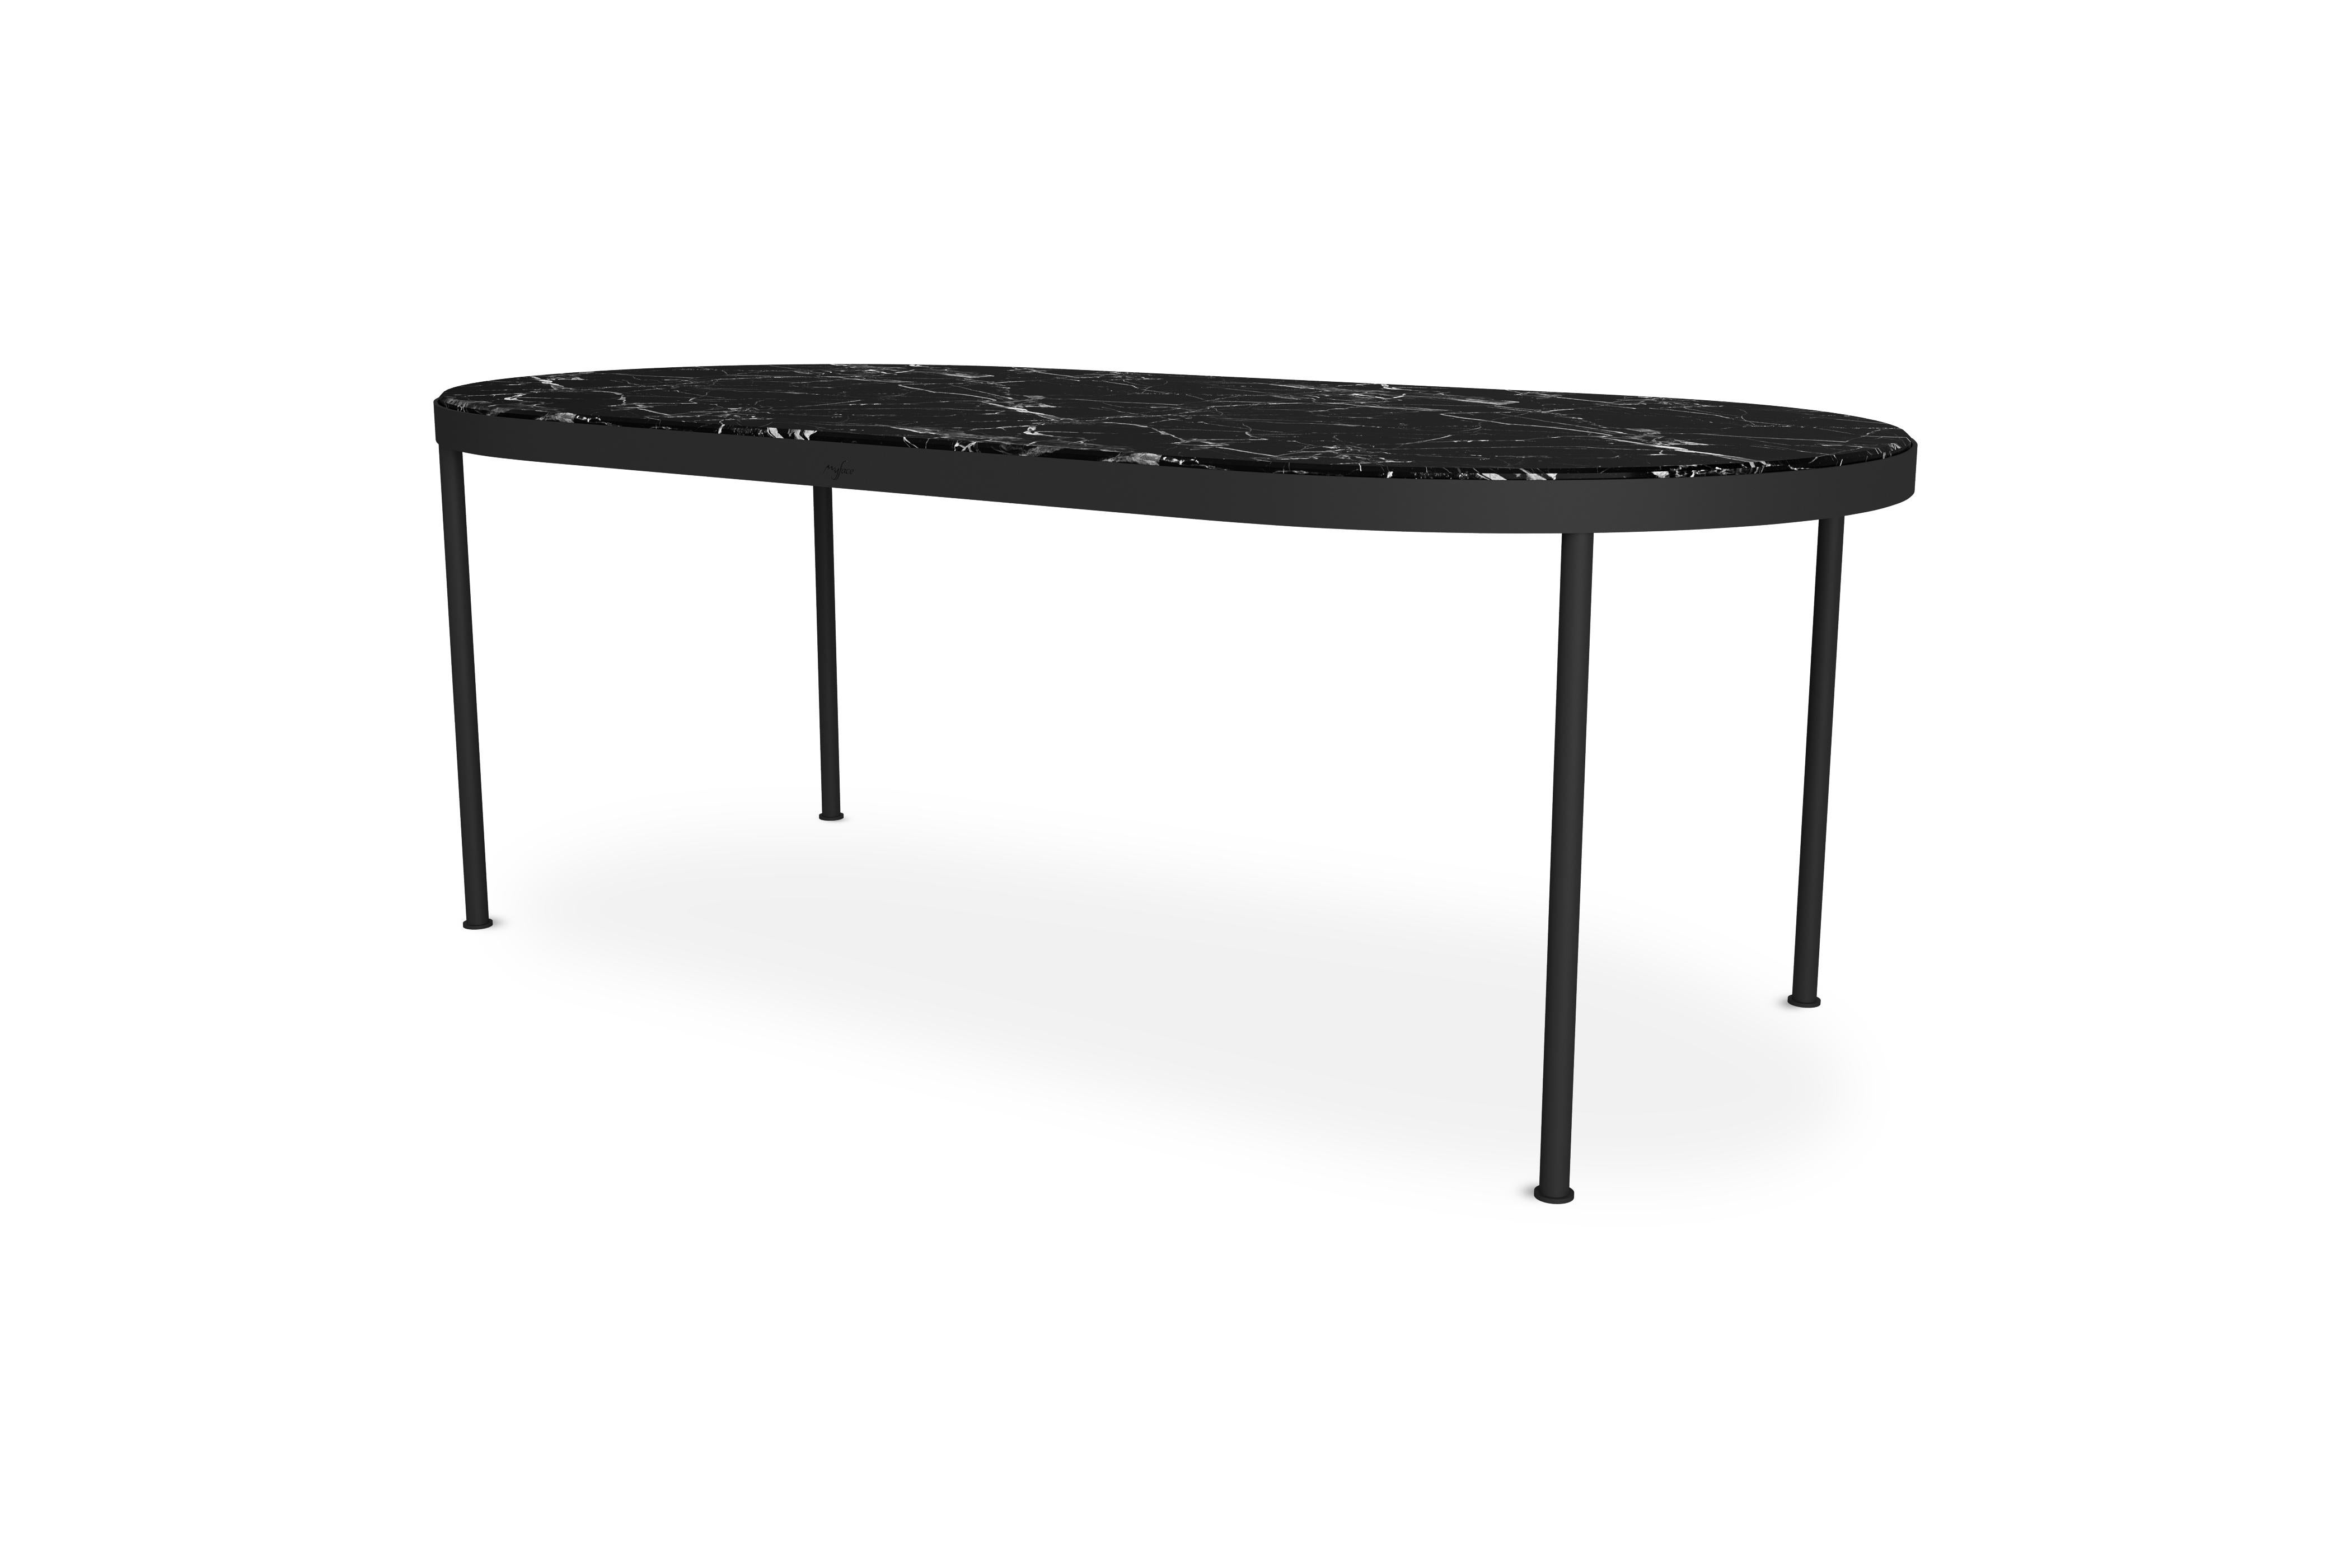 Portuguese Modern Nero Marquina Marble Outdoor Dining Table Big with Lacquered Legs For Sale